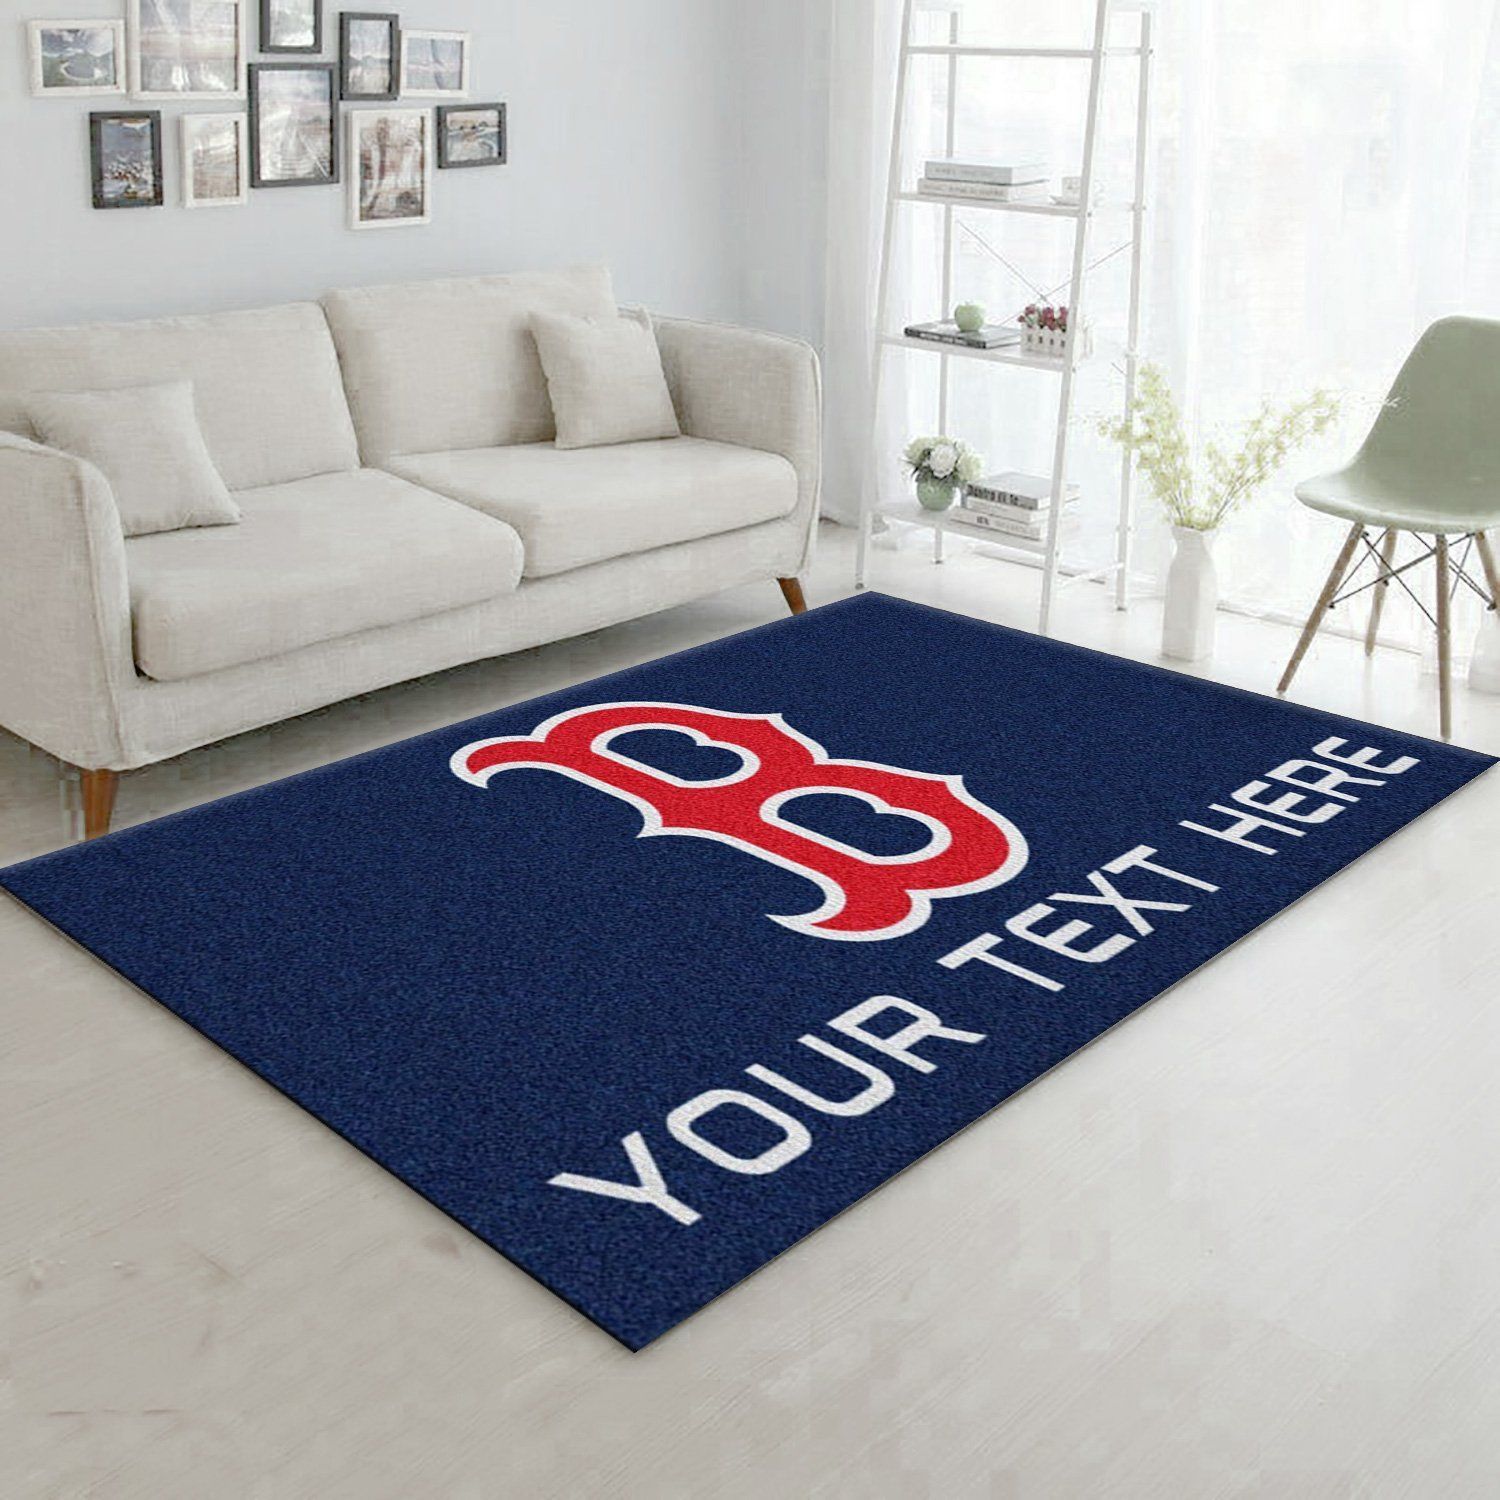 Customizable Boston Red Sox Personalized Accent Rug MLB Team Logos, Living room and bedroom Rug, US Gift Decor - Indoor Outdoor Rugs 2